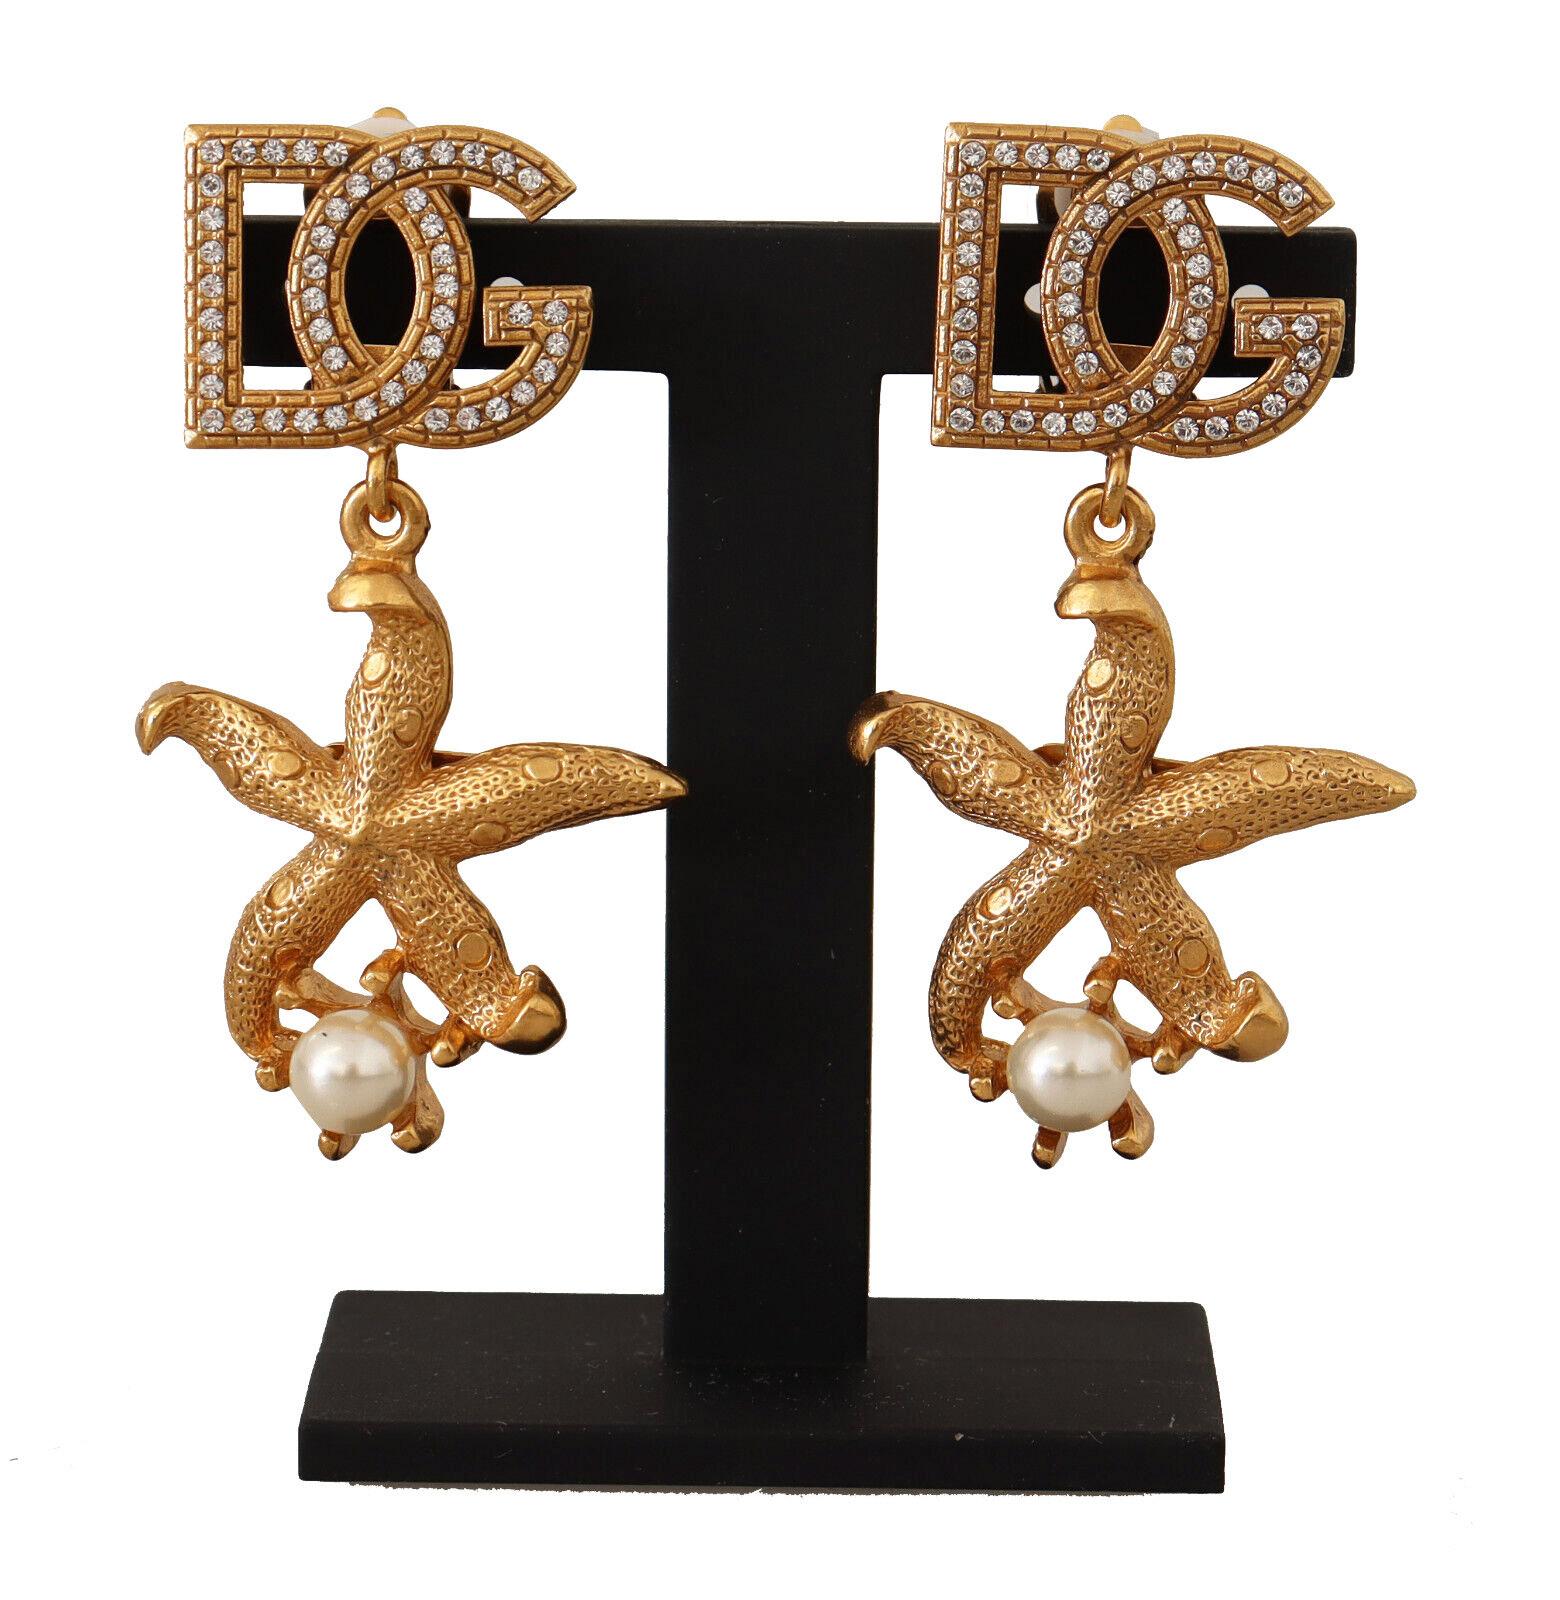 Dolce & Gabbana
Gorgeous brand new with tags, 100% Authentic Dolce & Gabbana Earrings.


Model: Clip-on Dangling
Motive: Starfish
Material: 80% Brass, 20% Glass

Color: Gold

Logo details
Made in Italy

Length: 5cm


Dolce & Gabbana Box, Original